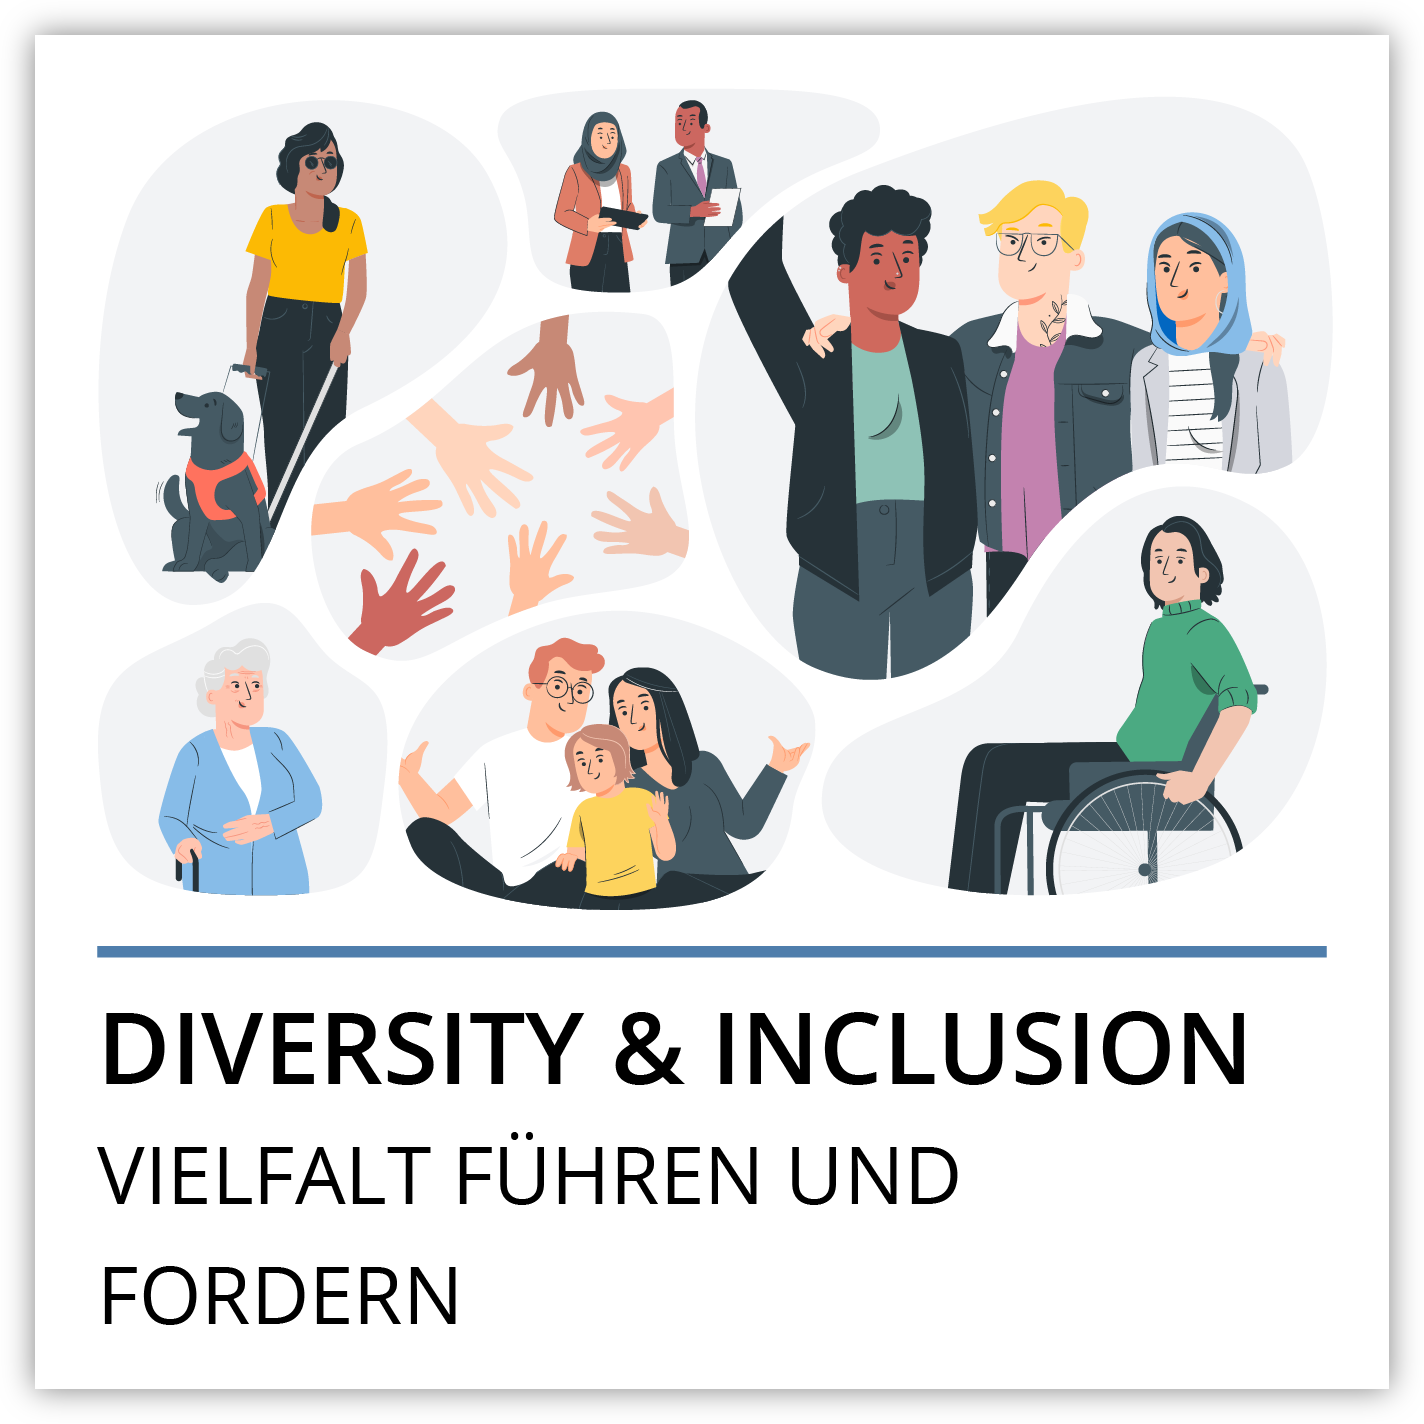 Image for E-Learning Diversity & Inclusion